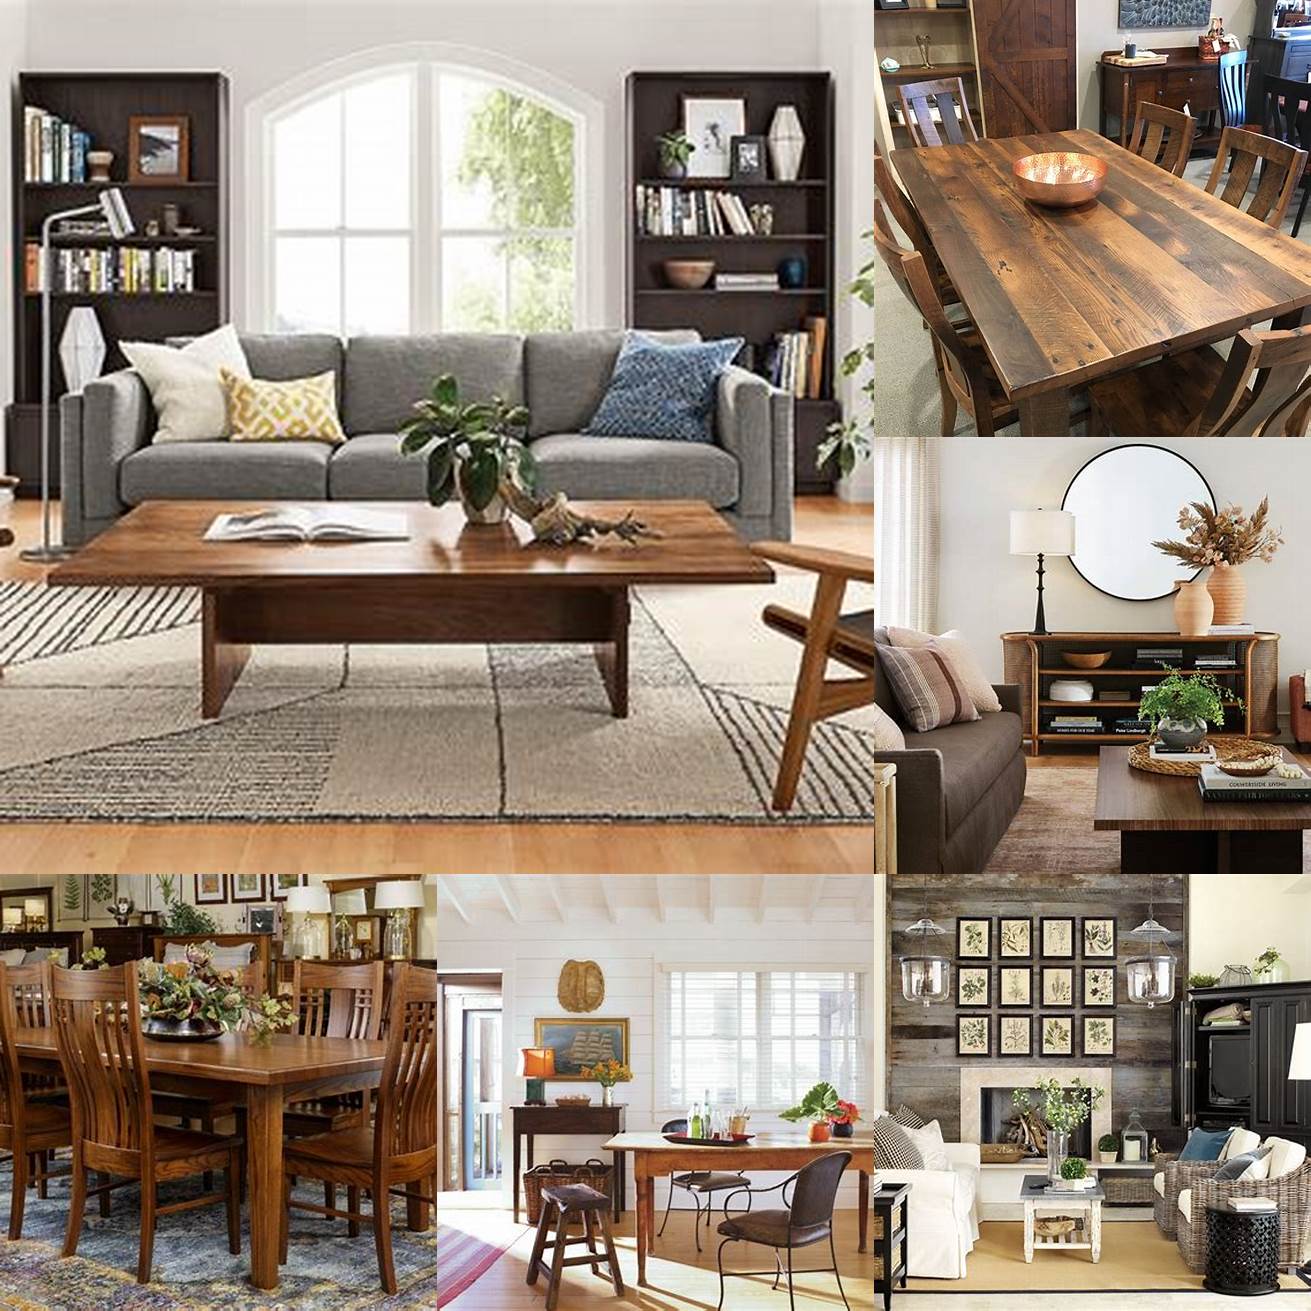 2 In combination with other woods Mix and match walnut furniture with pieces made from other woods such as oak or cherry for a more eclectic look